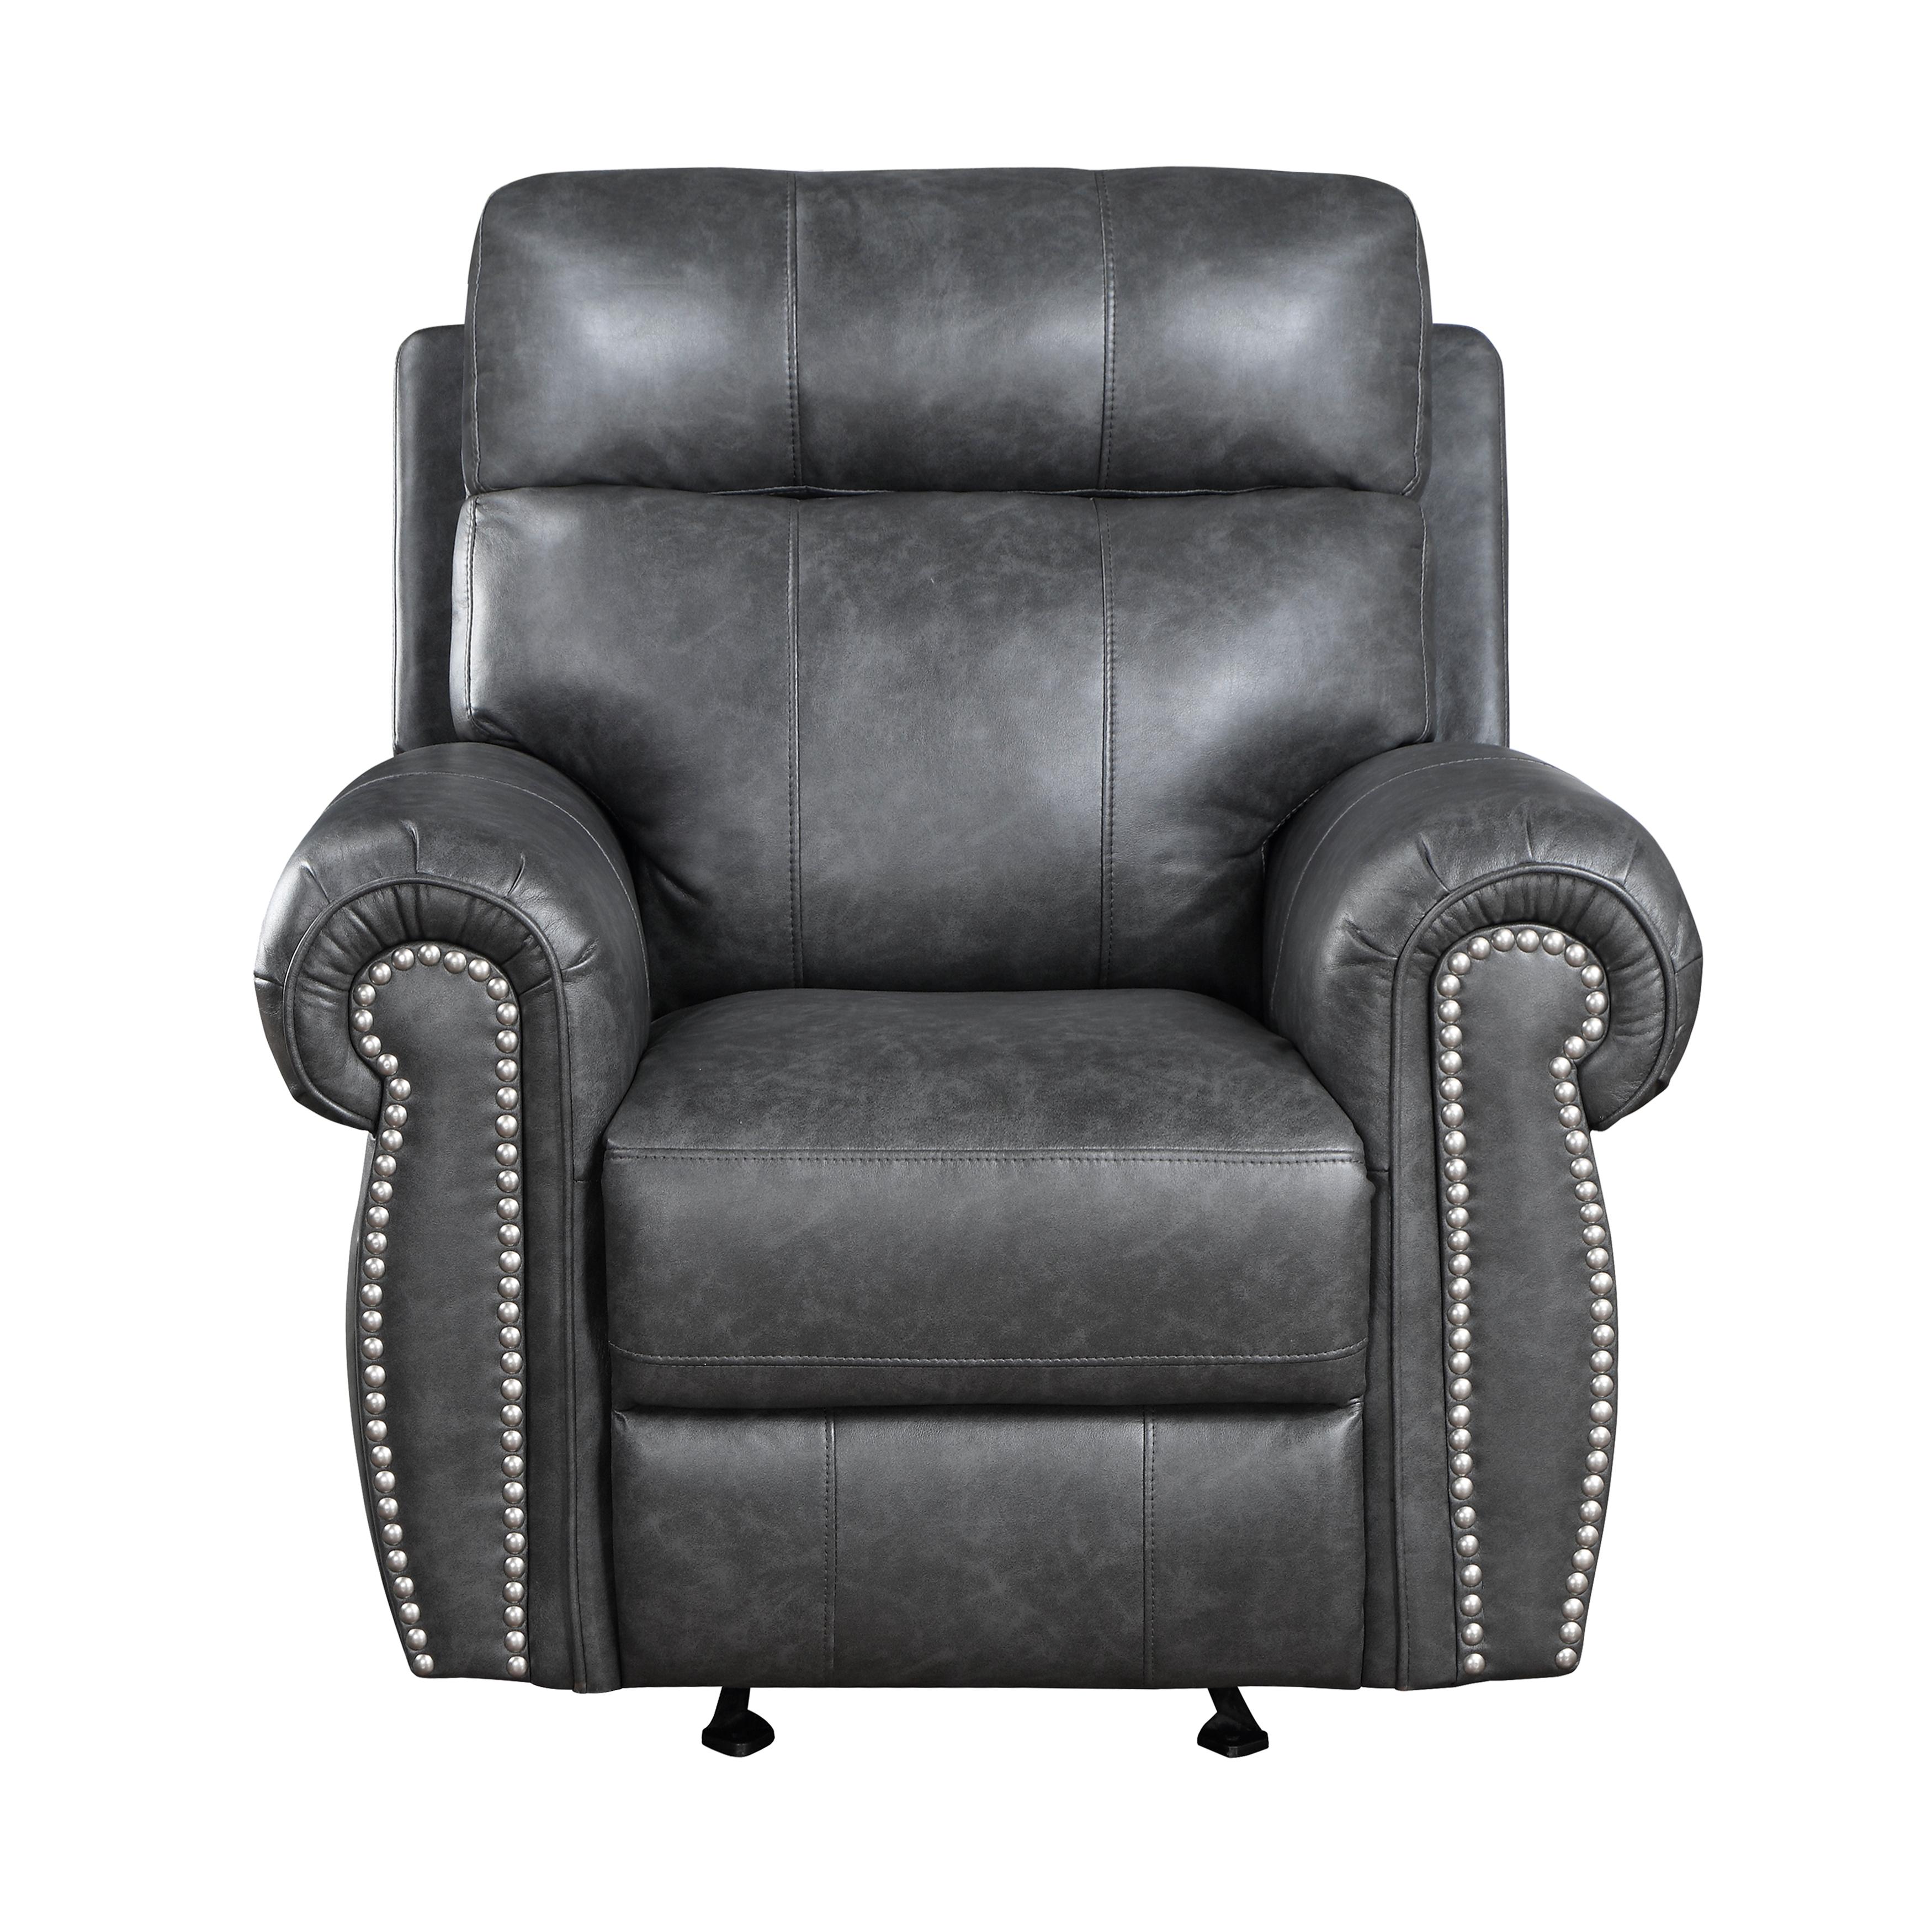 Transitional Reclining Chair 9488GY-1 Granville 9488GY-1 in Gray Suede